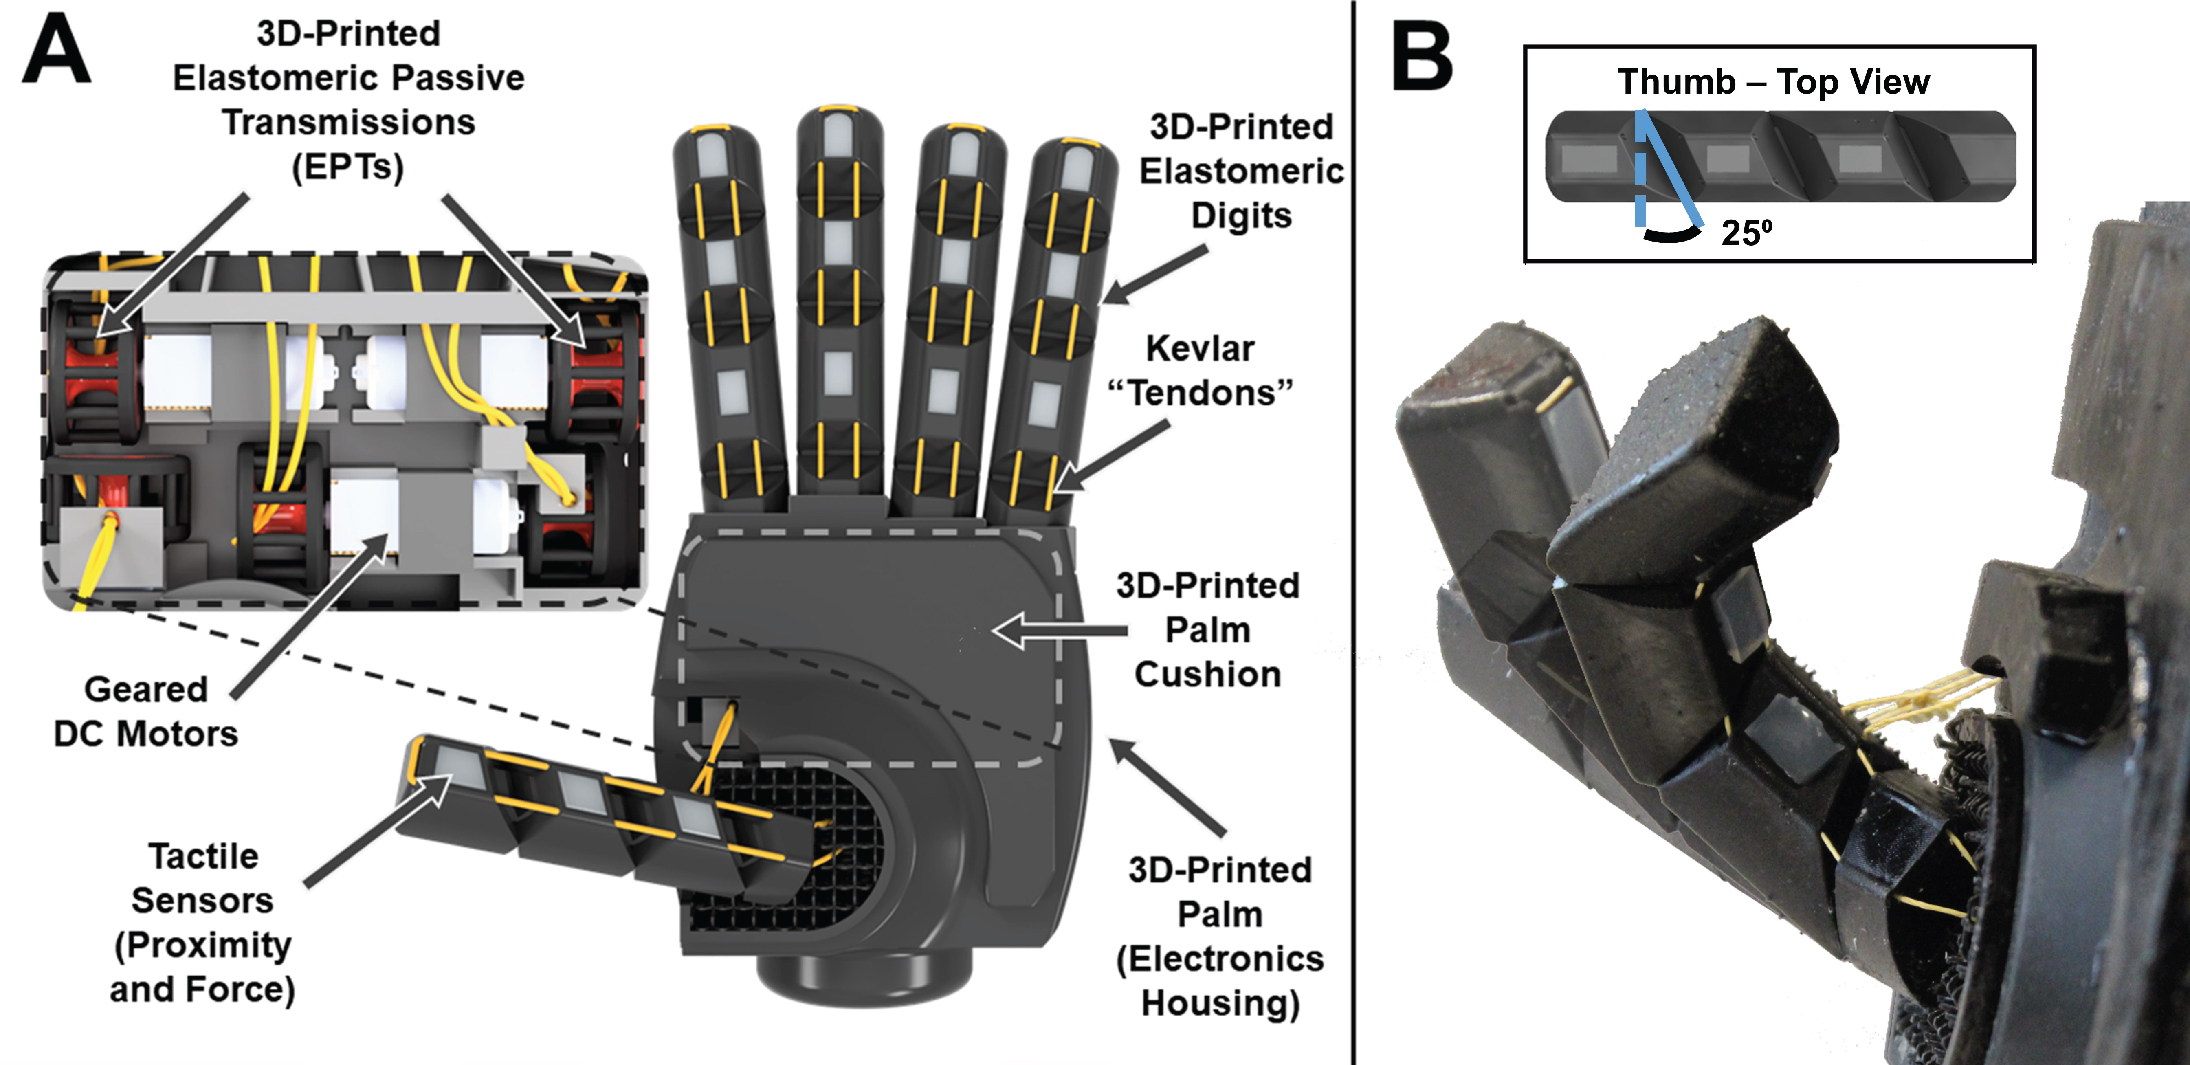 This 3D-printed prosthetic hand combines speed and strength with simplicity